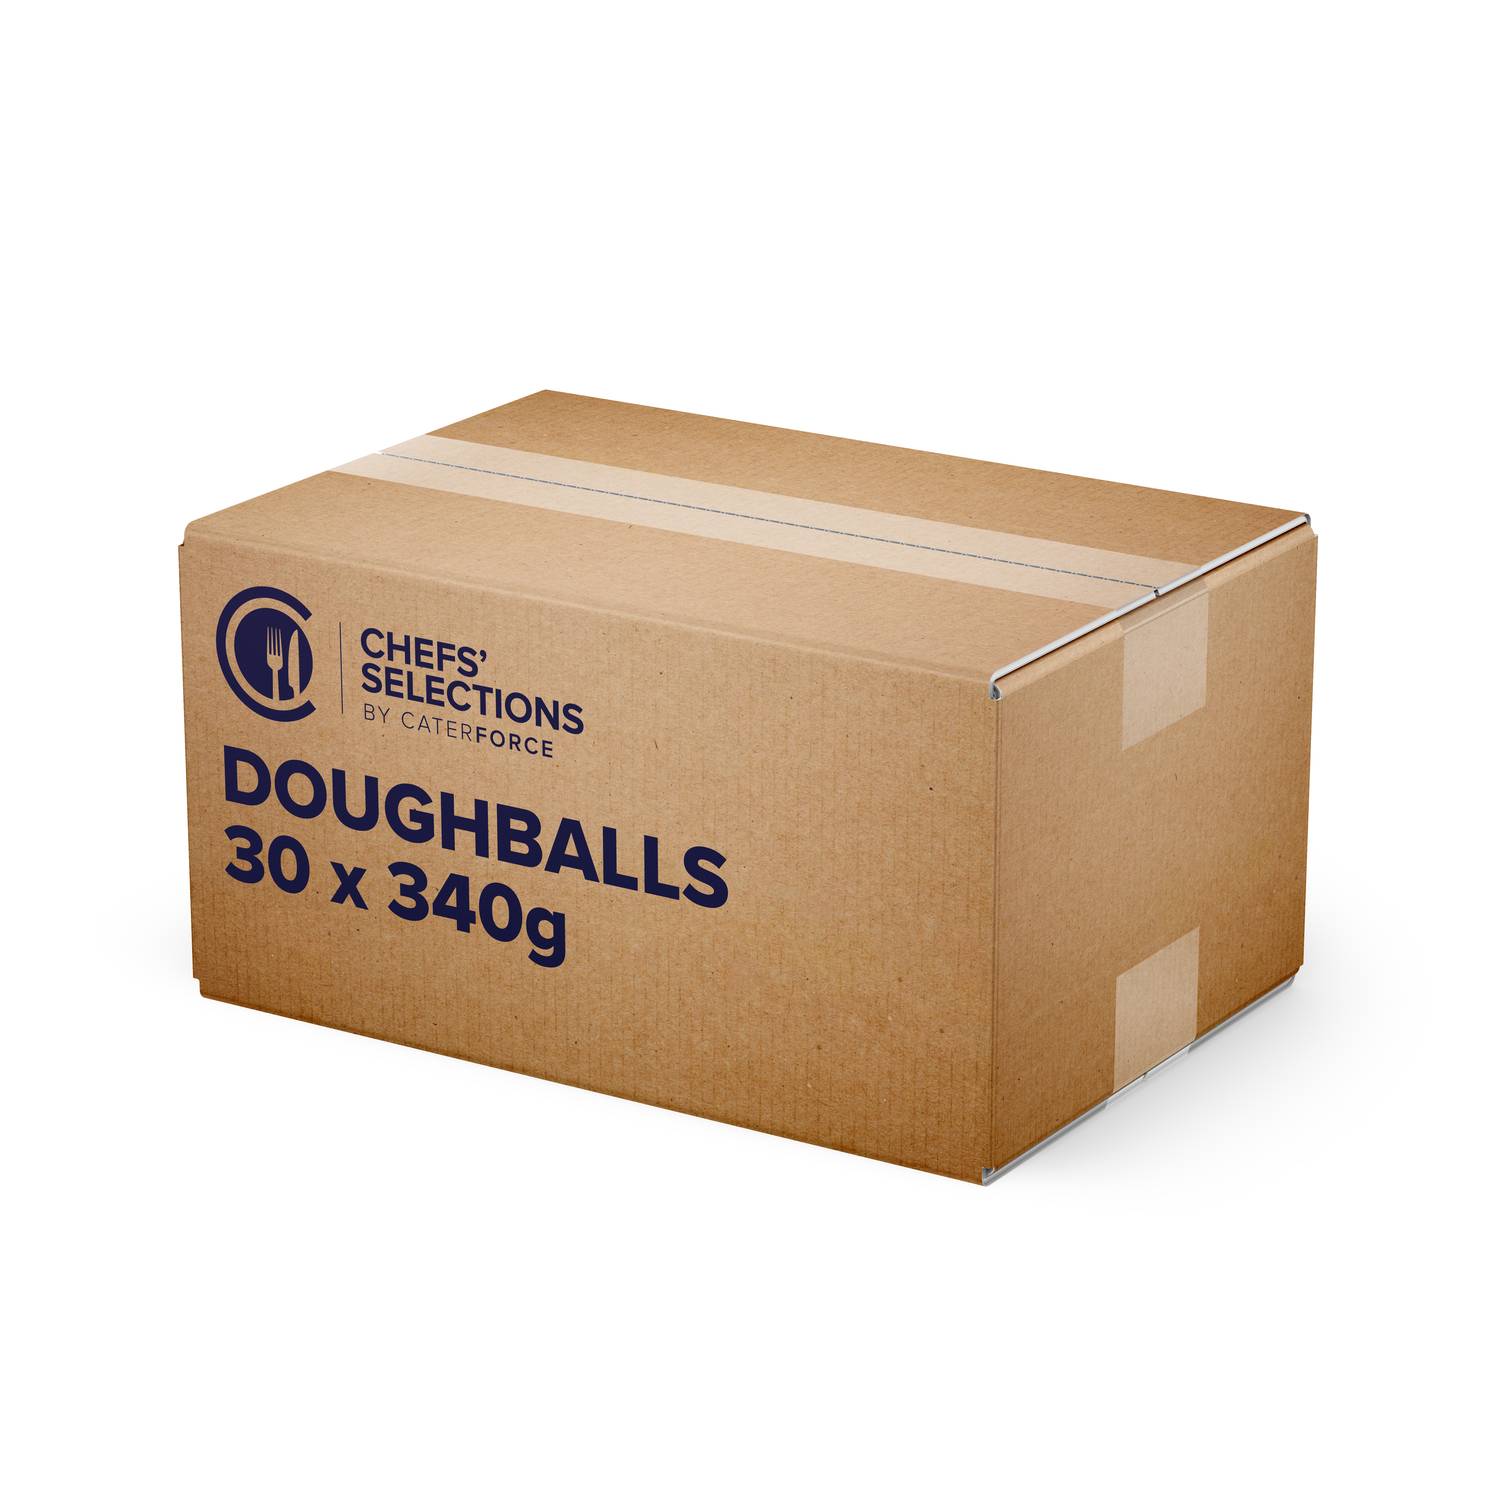 Chefs’ Selections Doughballs 340g (30 x 340g)